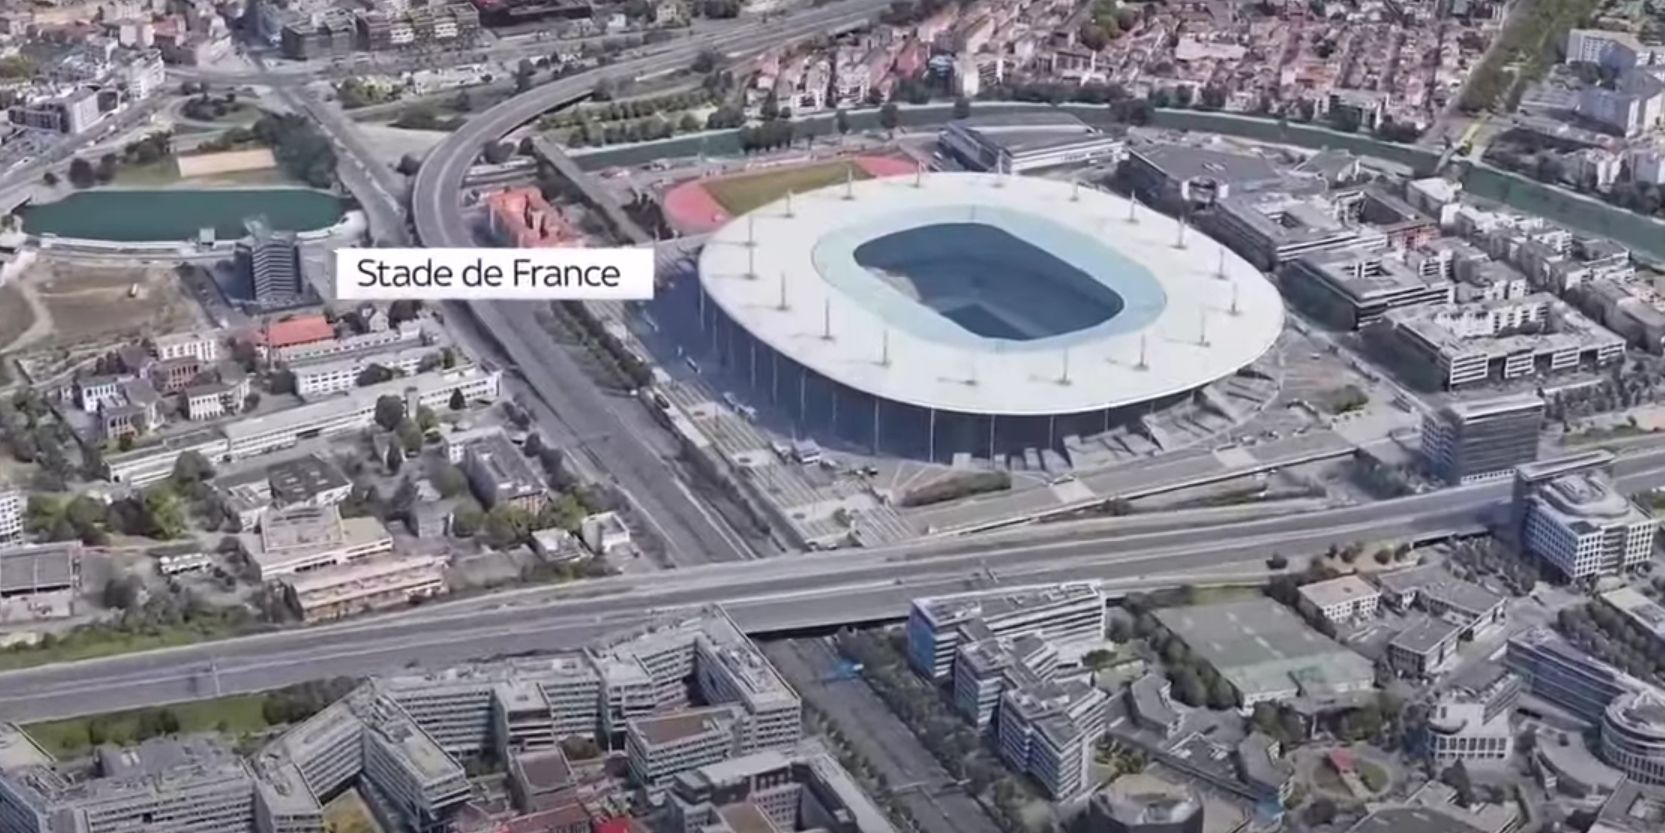 (Video) ‘What actually happened during the Champions League final’ – Sky News share report on the Stade de France